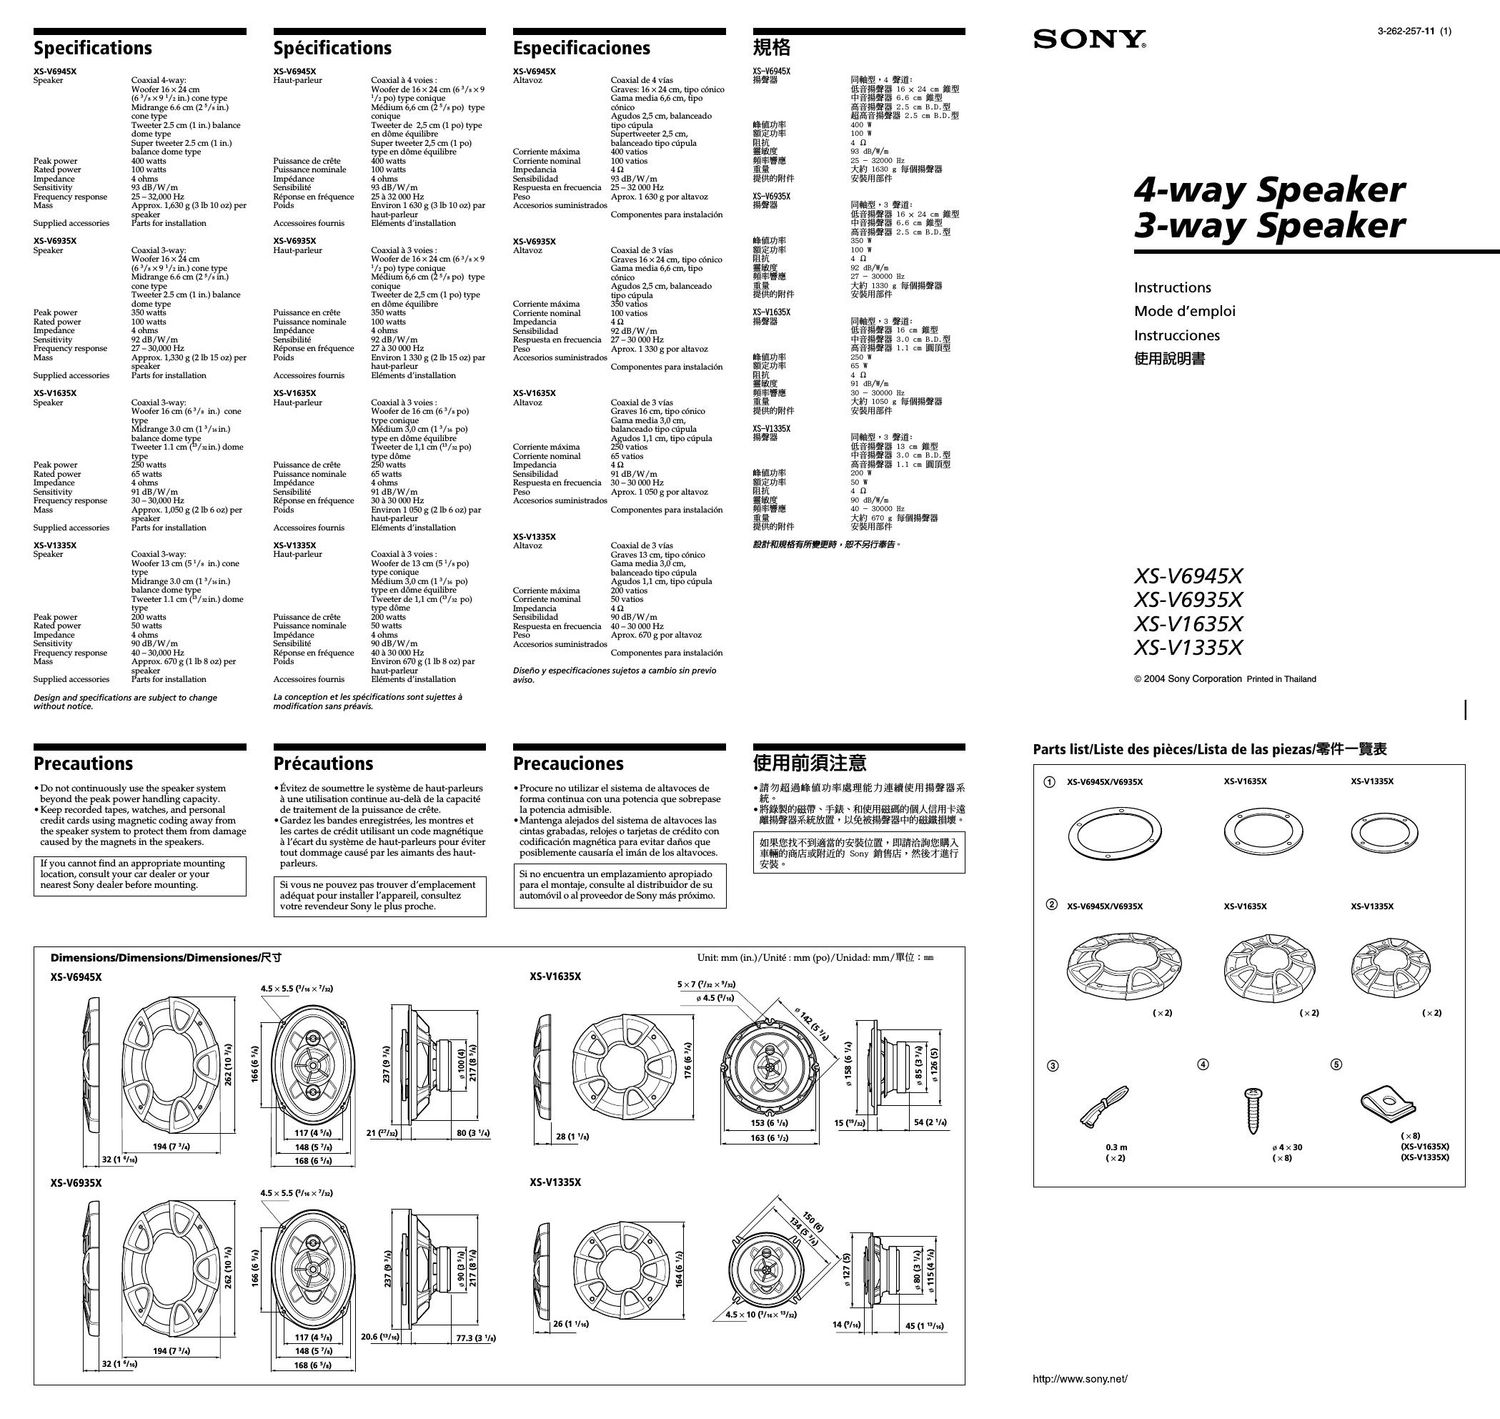 sony xs v 1335 x owners manual